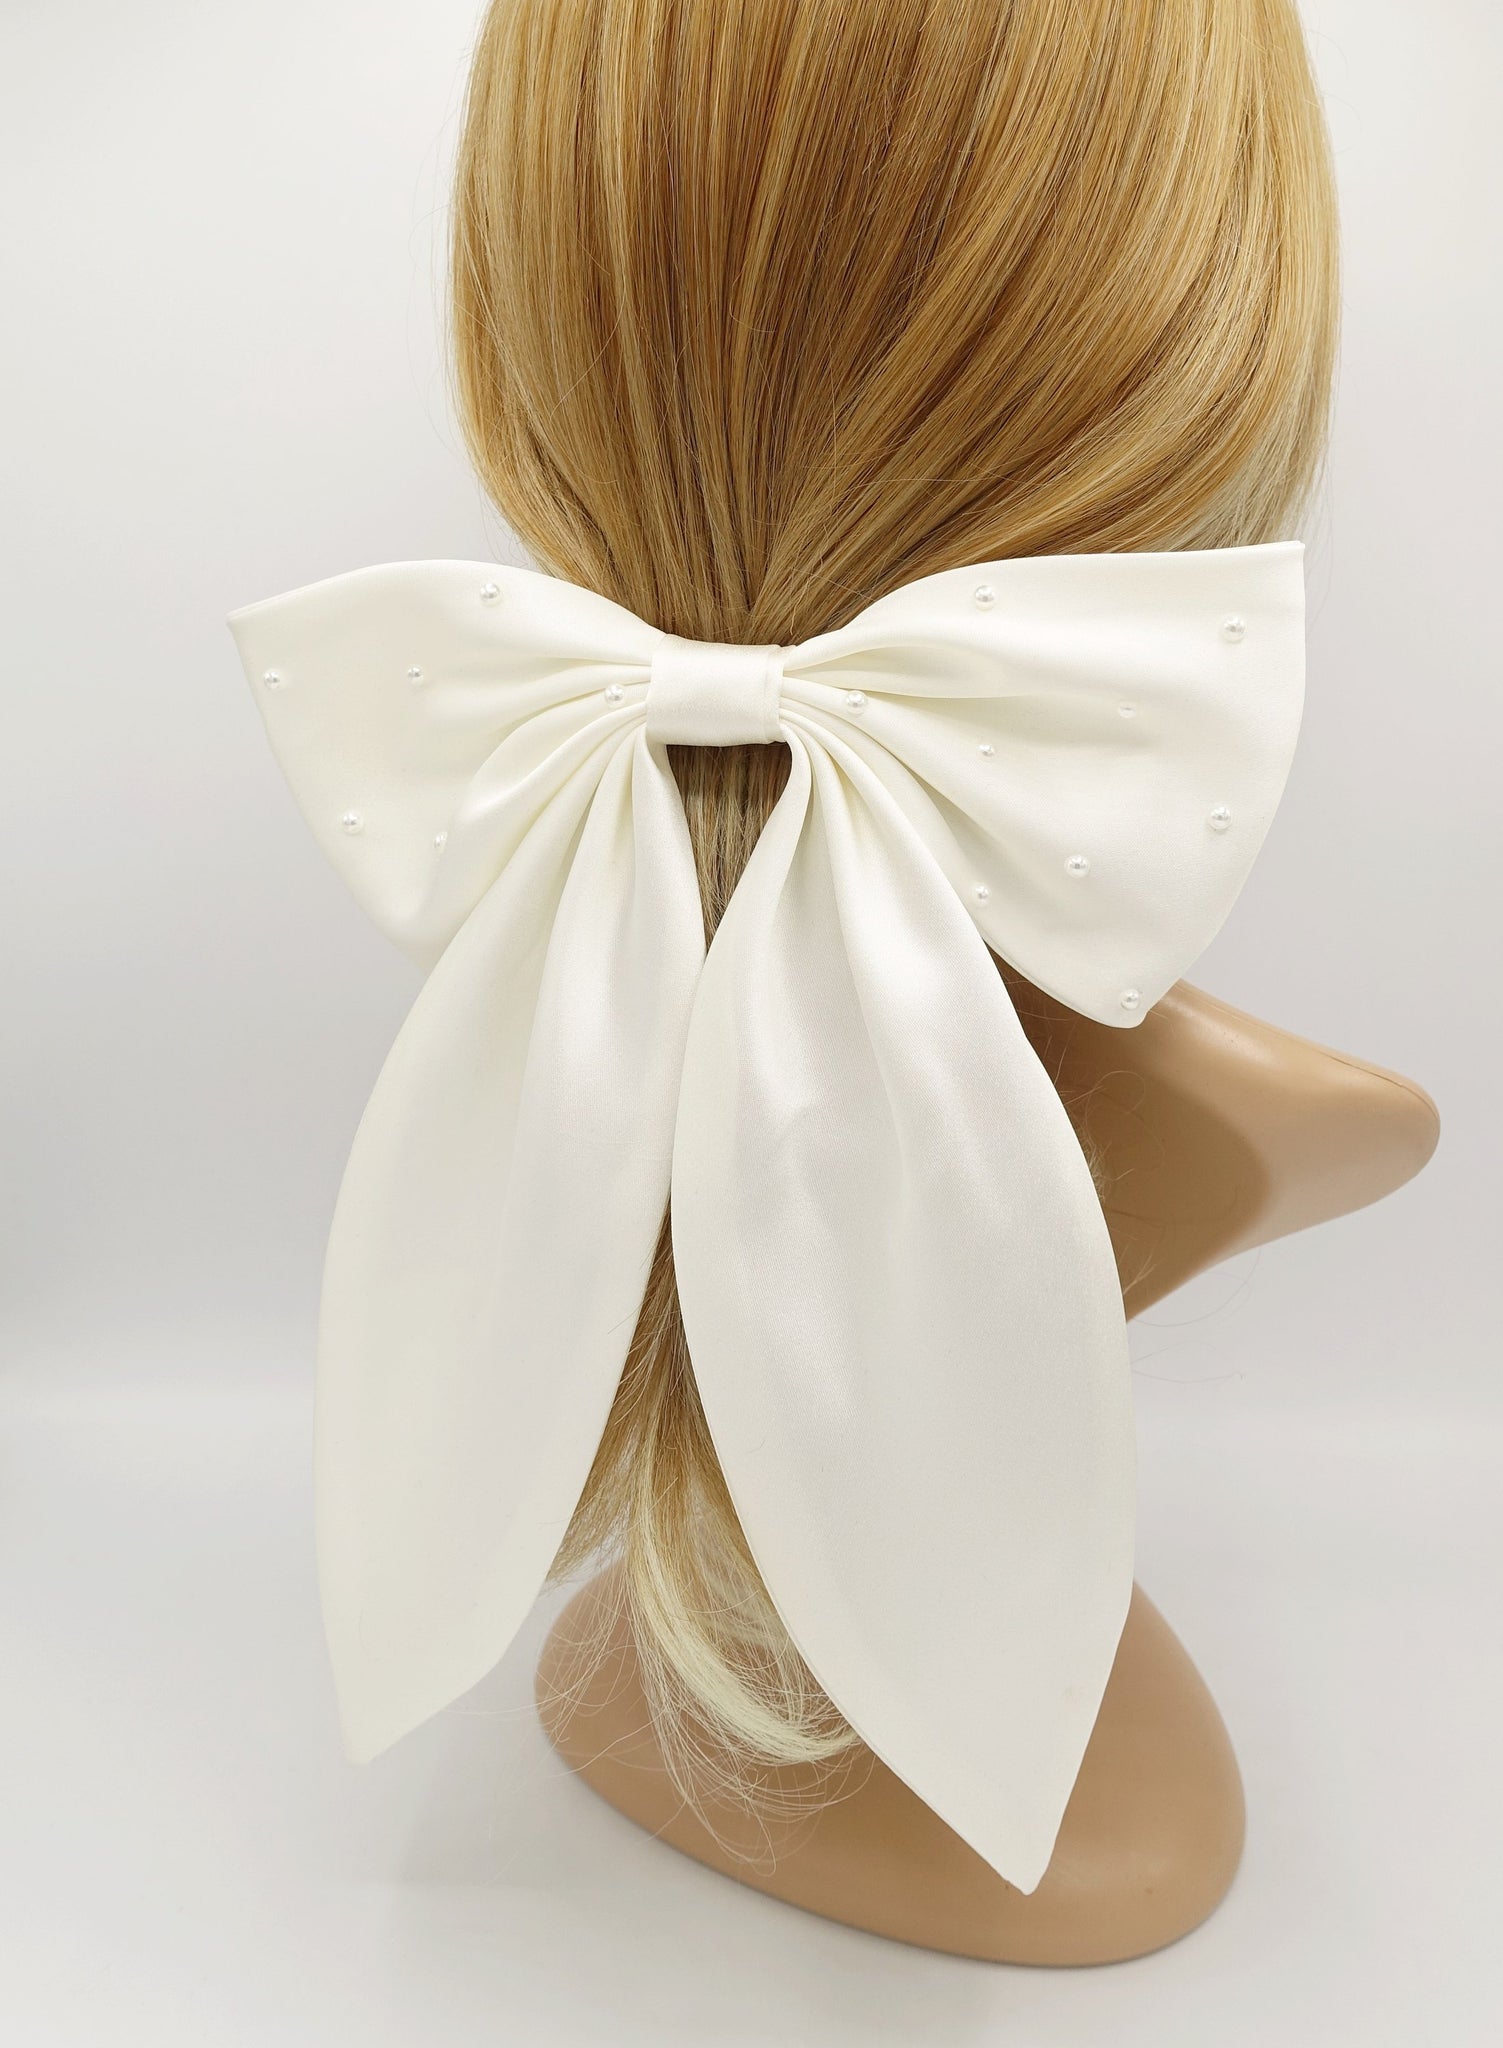 veryshine3 claw/banana/barrette Cream white pearl embellished satin hair bow big size large hair bow for women